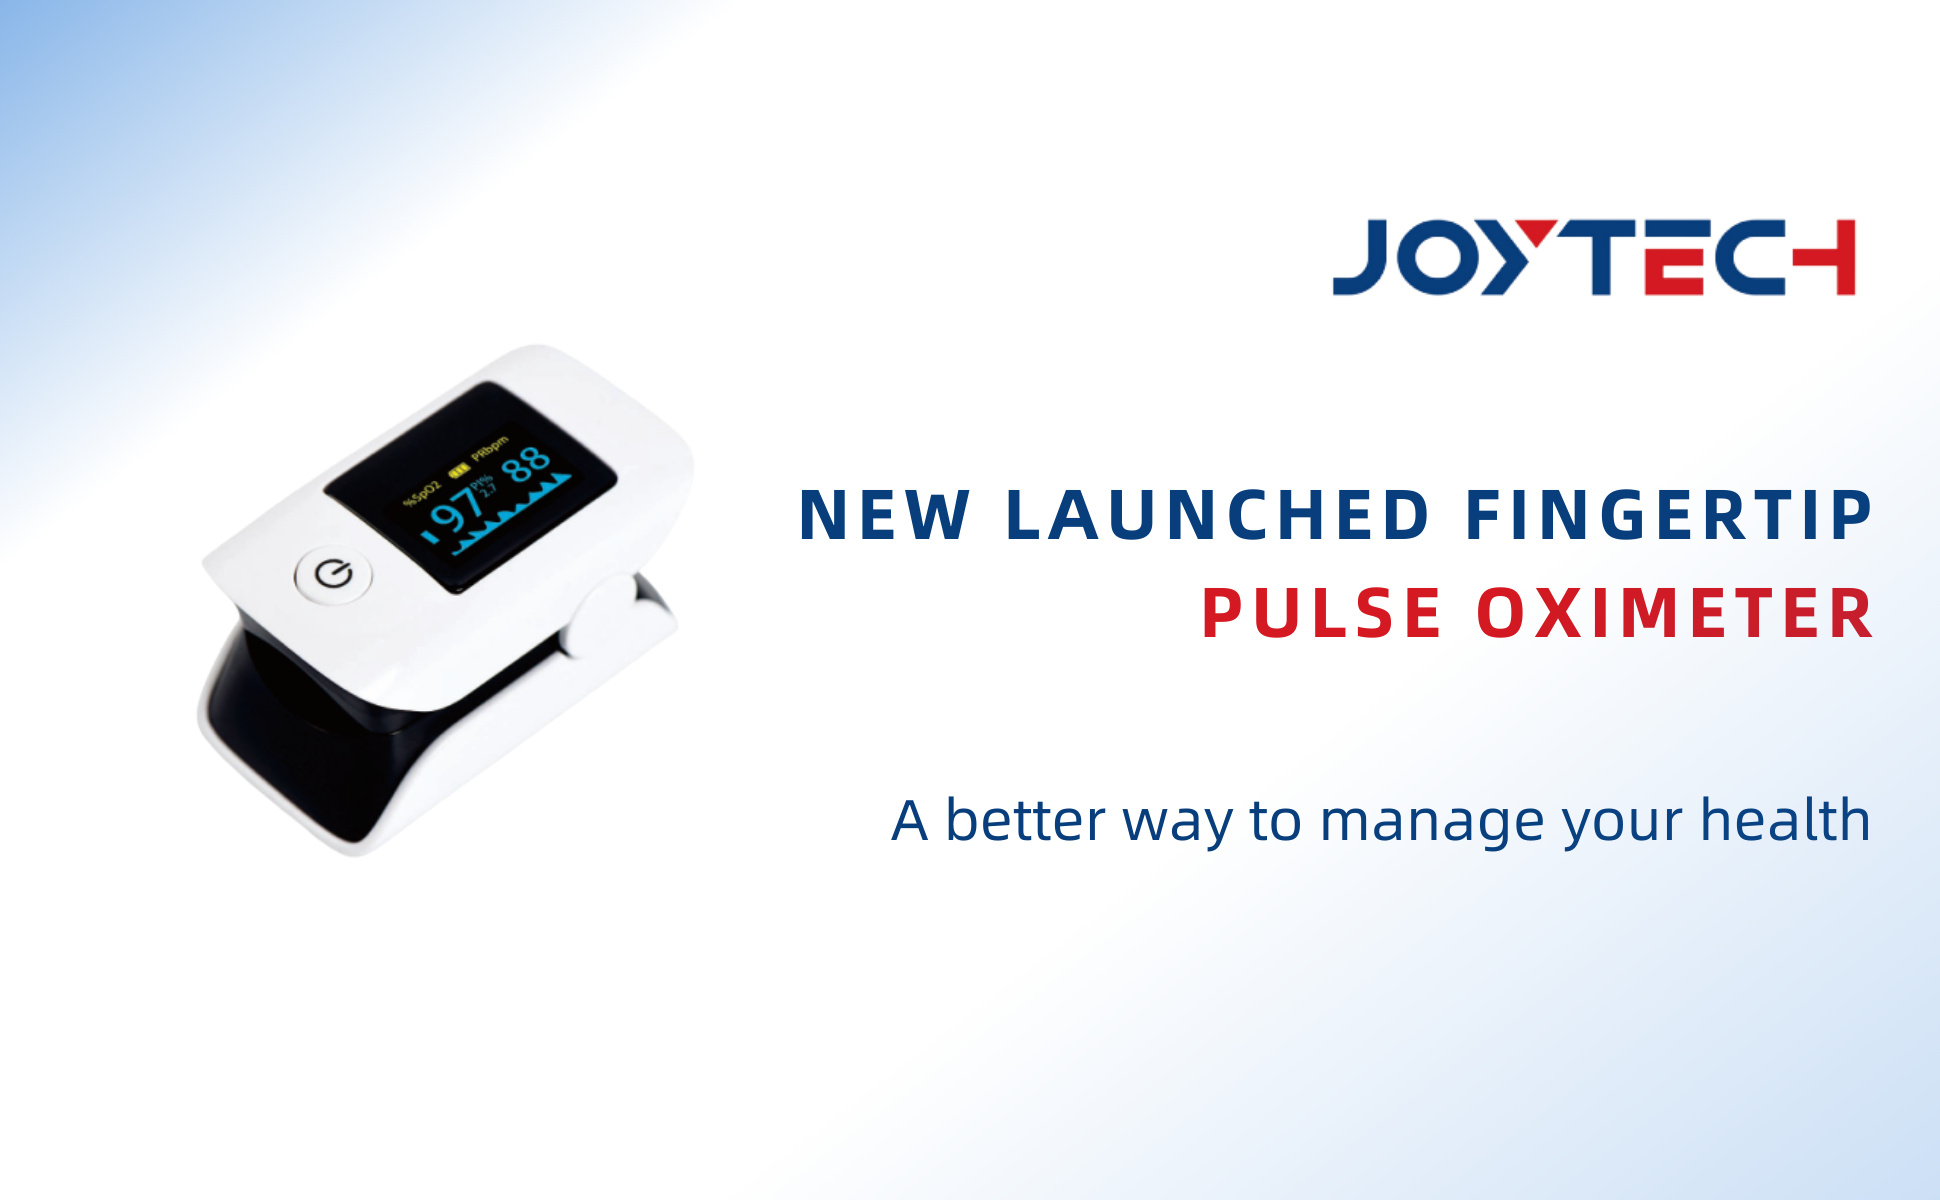 New Launched Fingertip Pulse Oximeter